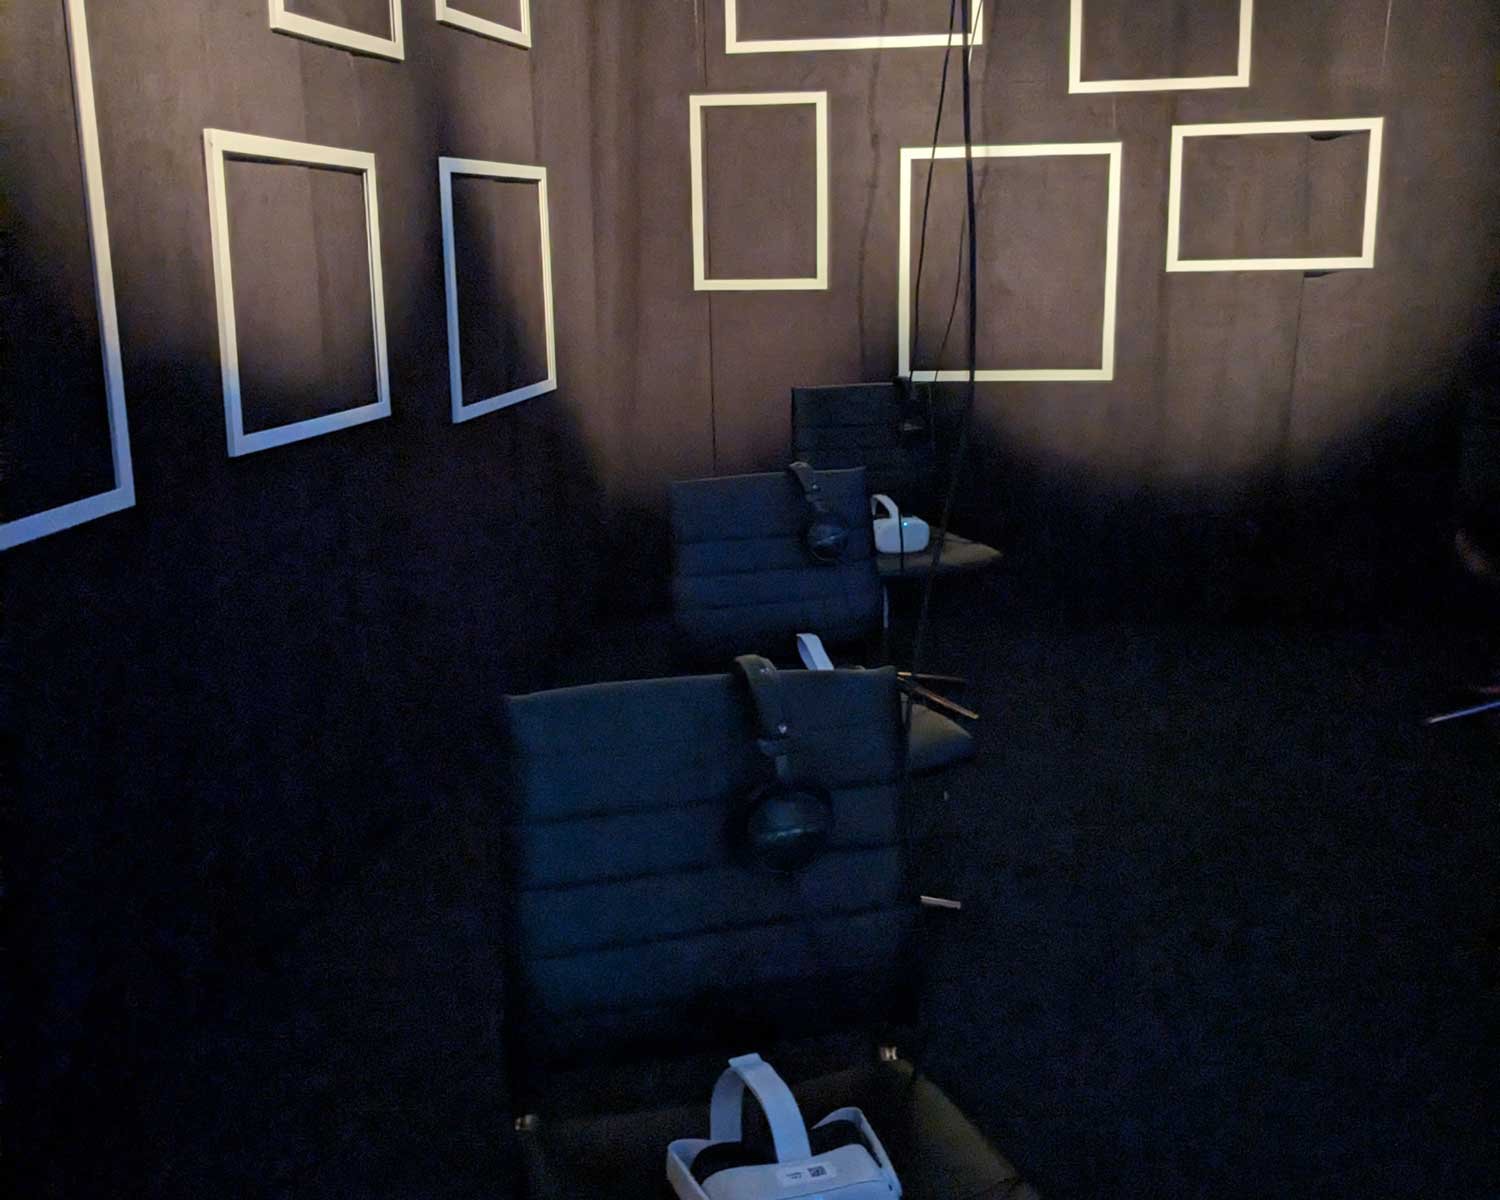 The primed VR Viewing Room